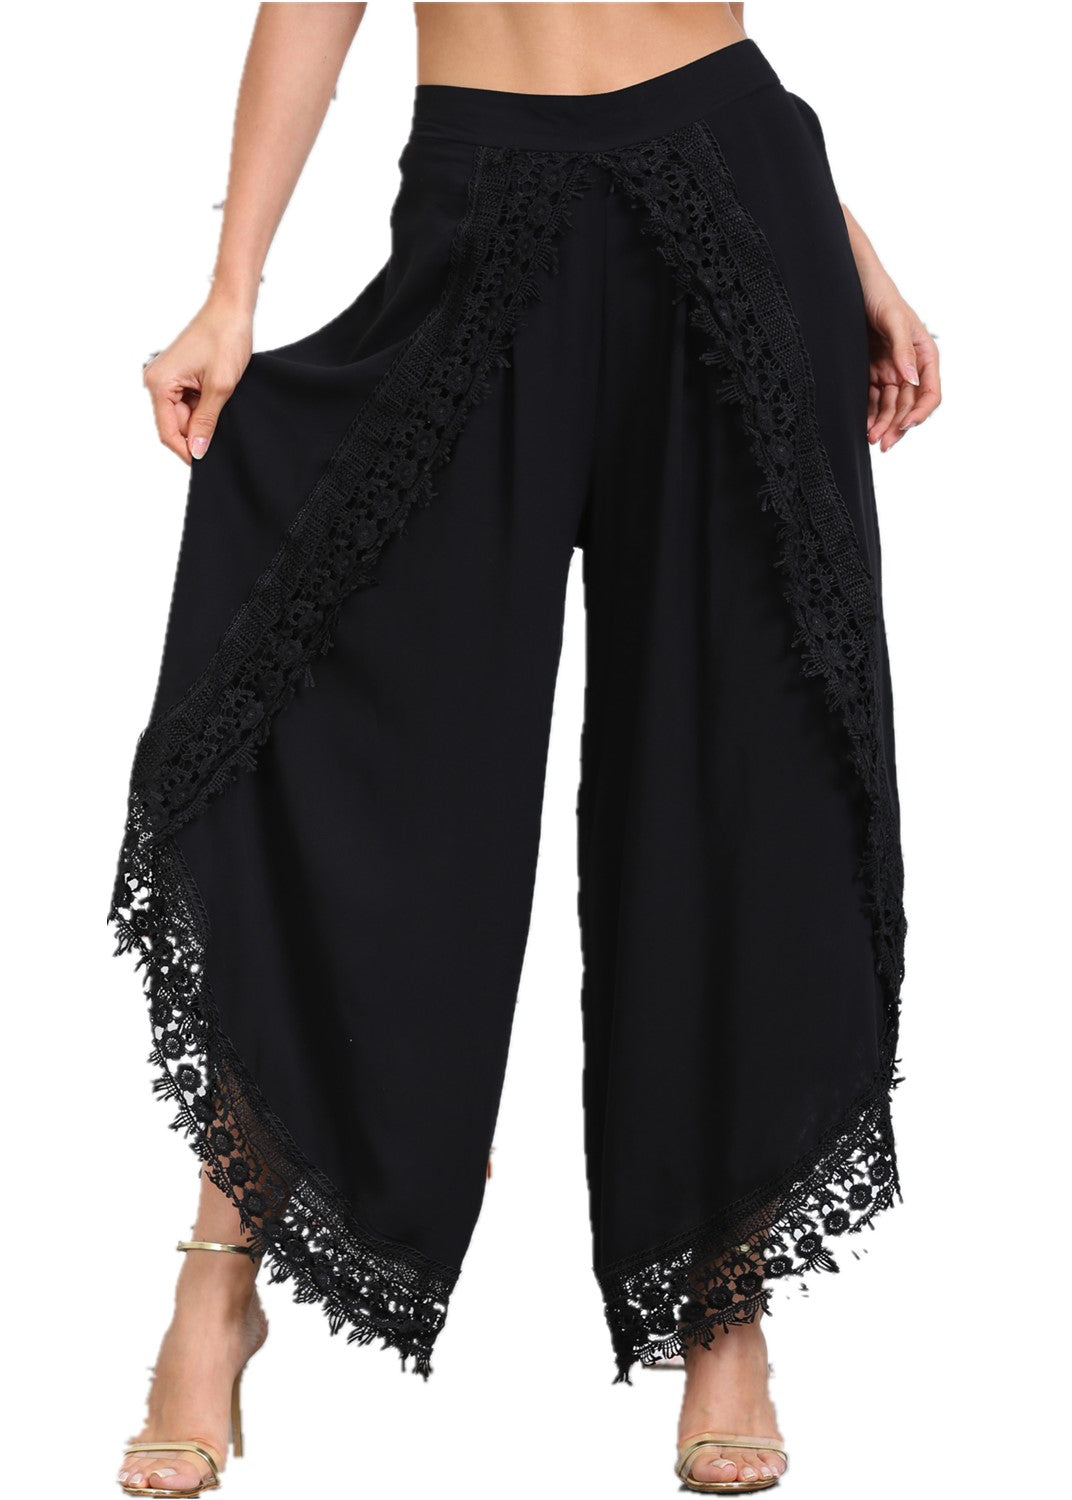 Women's Black High Waist Wide Leg Palazzo Pants with Lace Sides – Nyteez